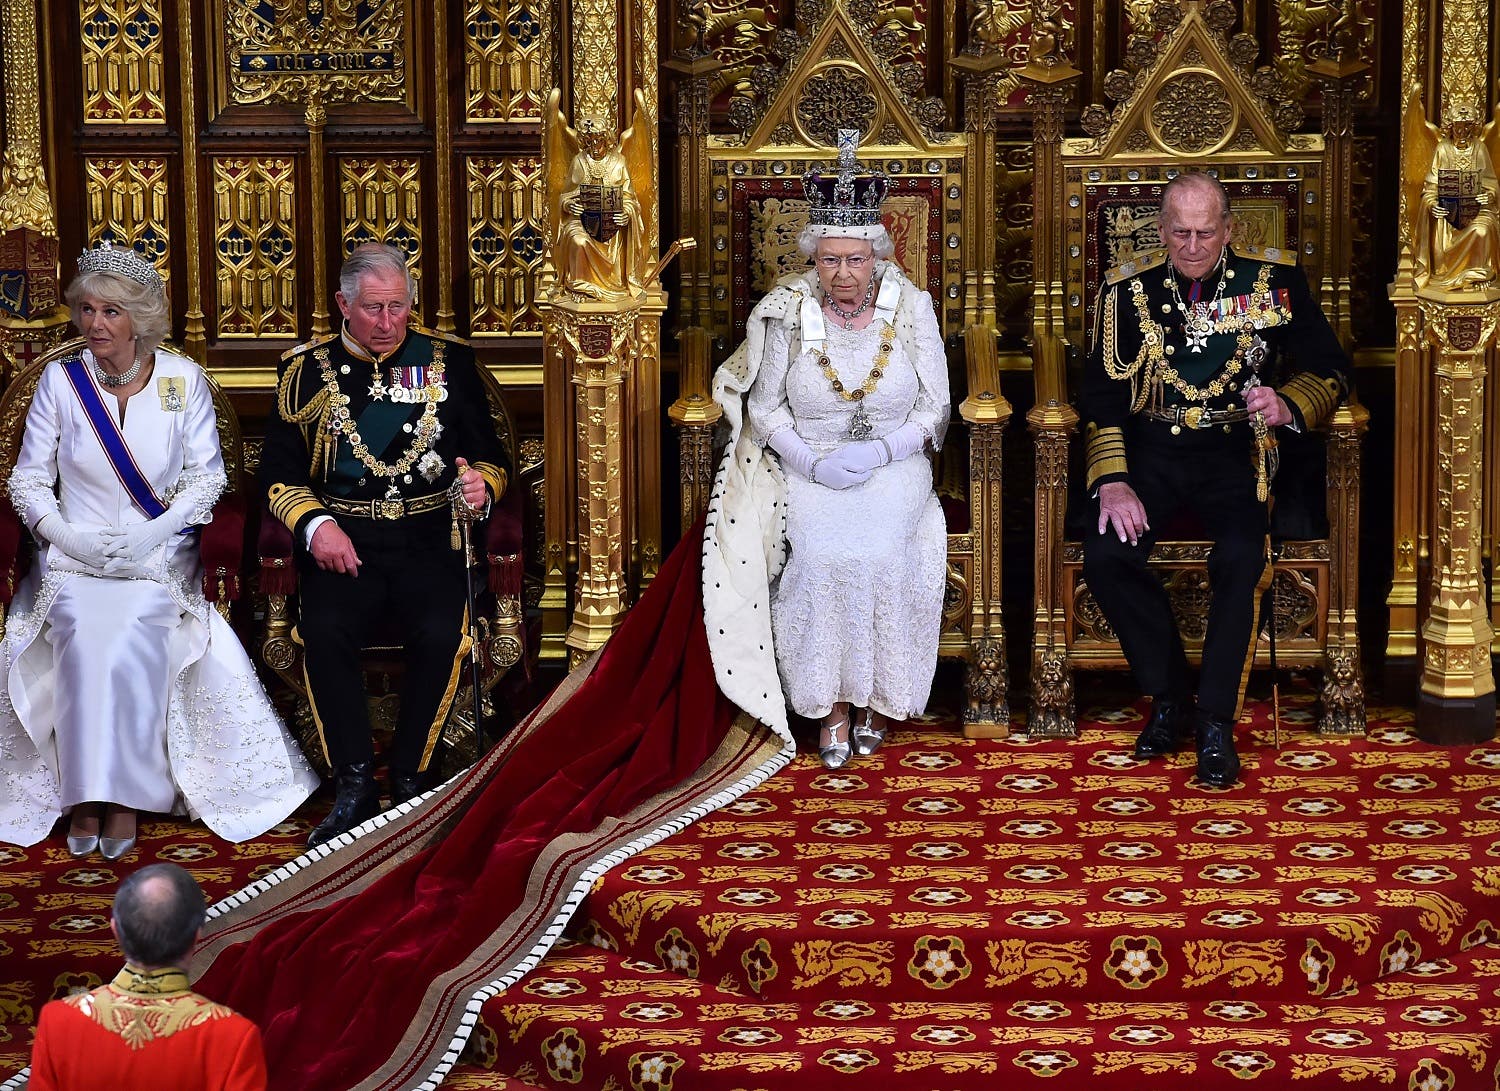 Britain's Queen Elizabeth II, 2nd right, seated on the throne in the House of Lords next to her husband, Prince Philip, Duke of Edinburgh, right, son, Prince Charles, Prince of Wales, 2nd left and his wife Camilla, Duchess of Cornwall at the State Opening of Parliament (Photo: Ben Stansall/Pool Photo via AP)